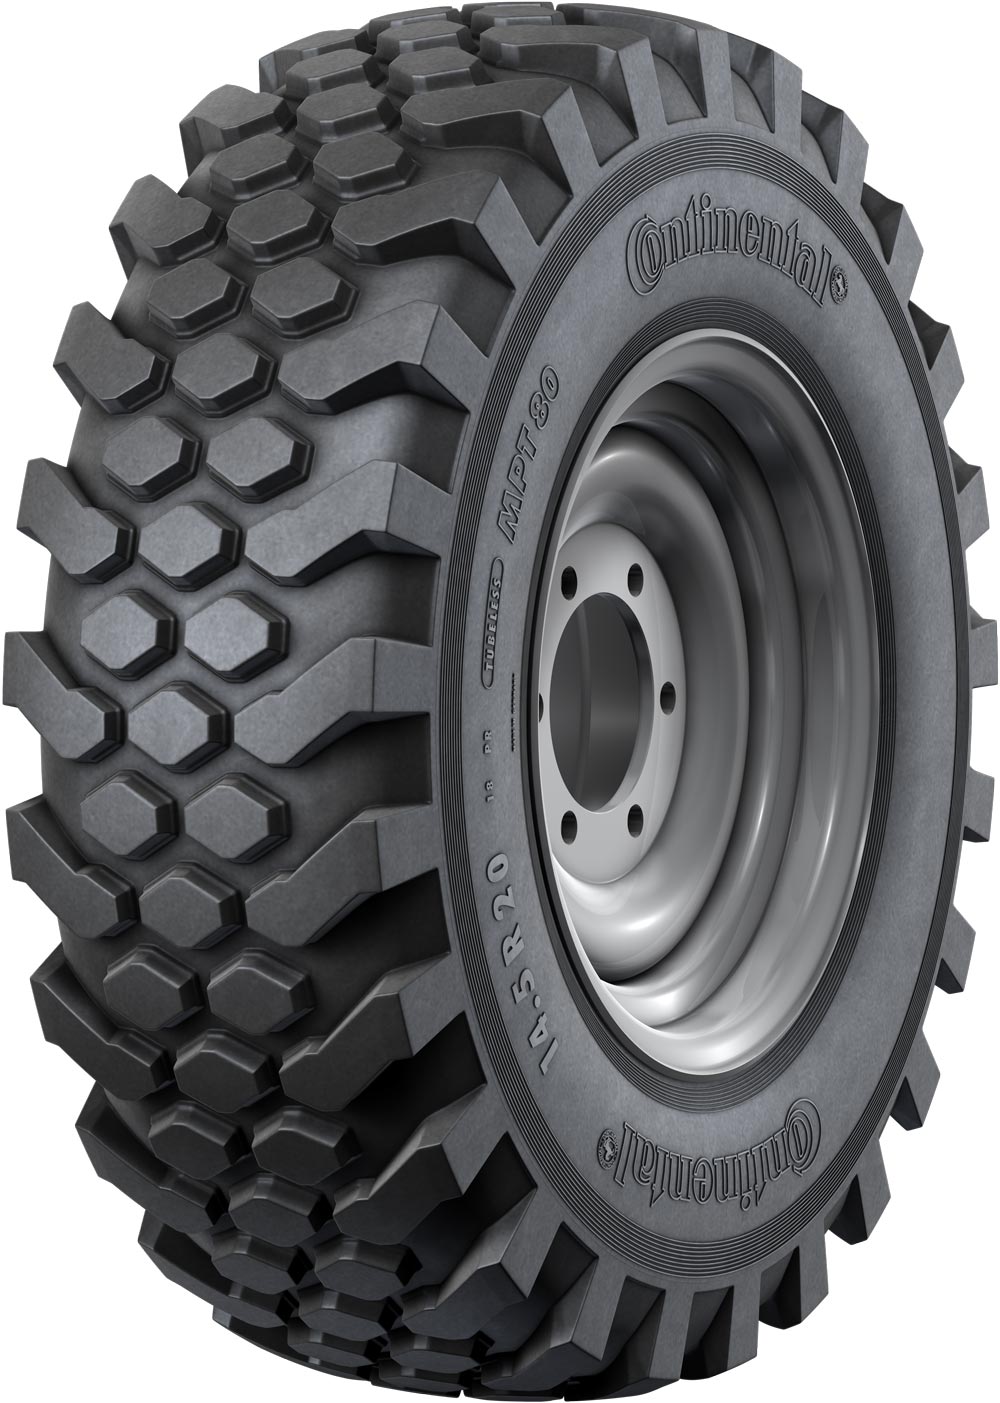 product_type-industrial_tires CONTINENTAL MPT80 TL 12.5 R20 80R